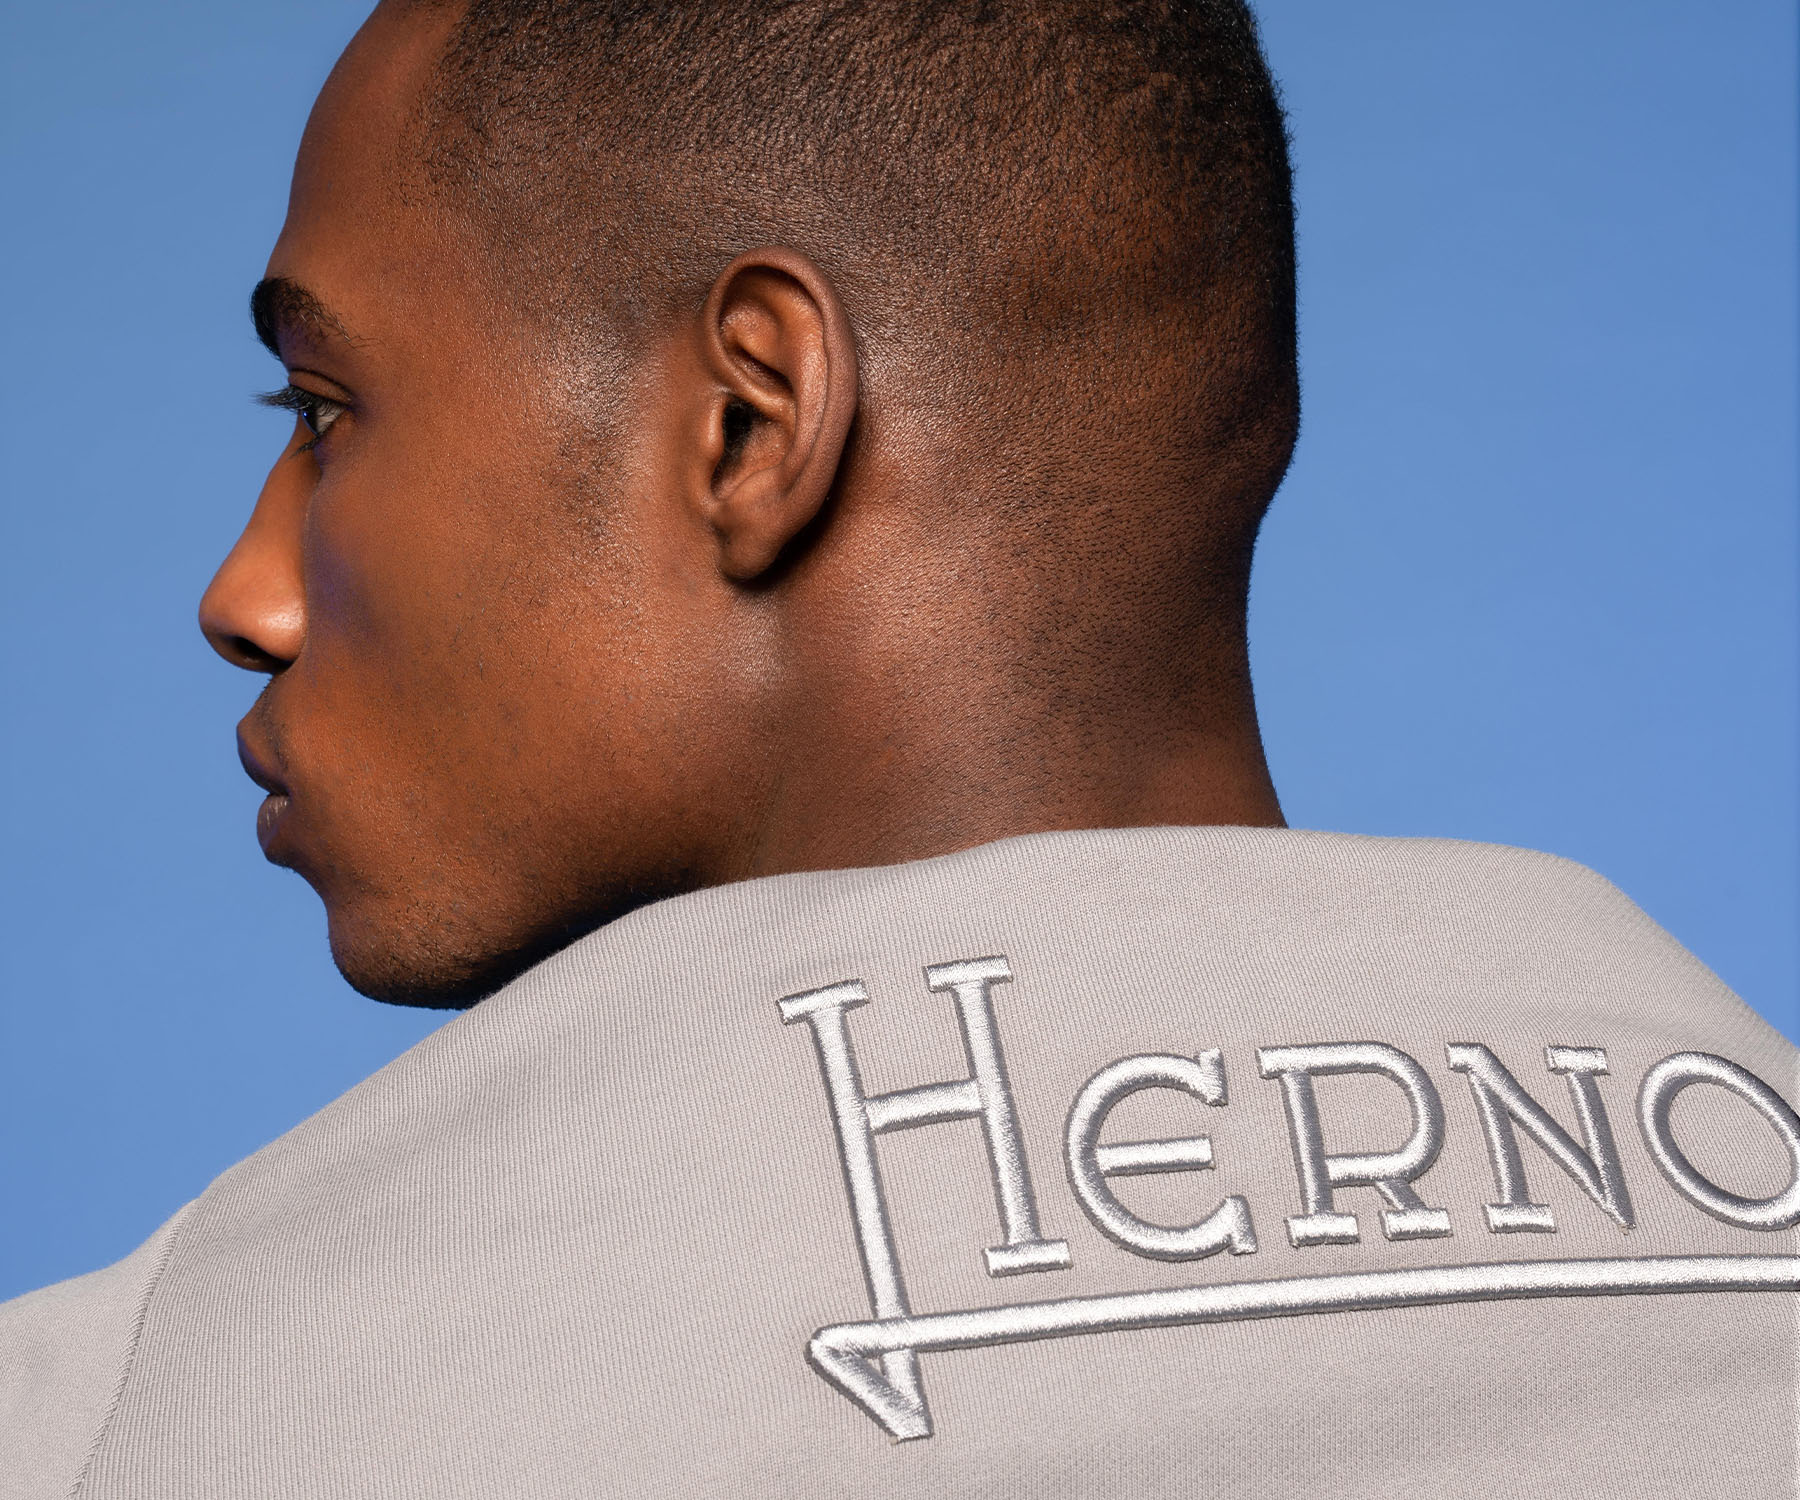 Official Herno® Boutique: Clothing for Women, Men & Kids